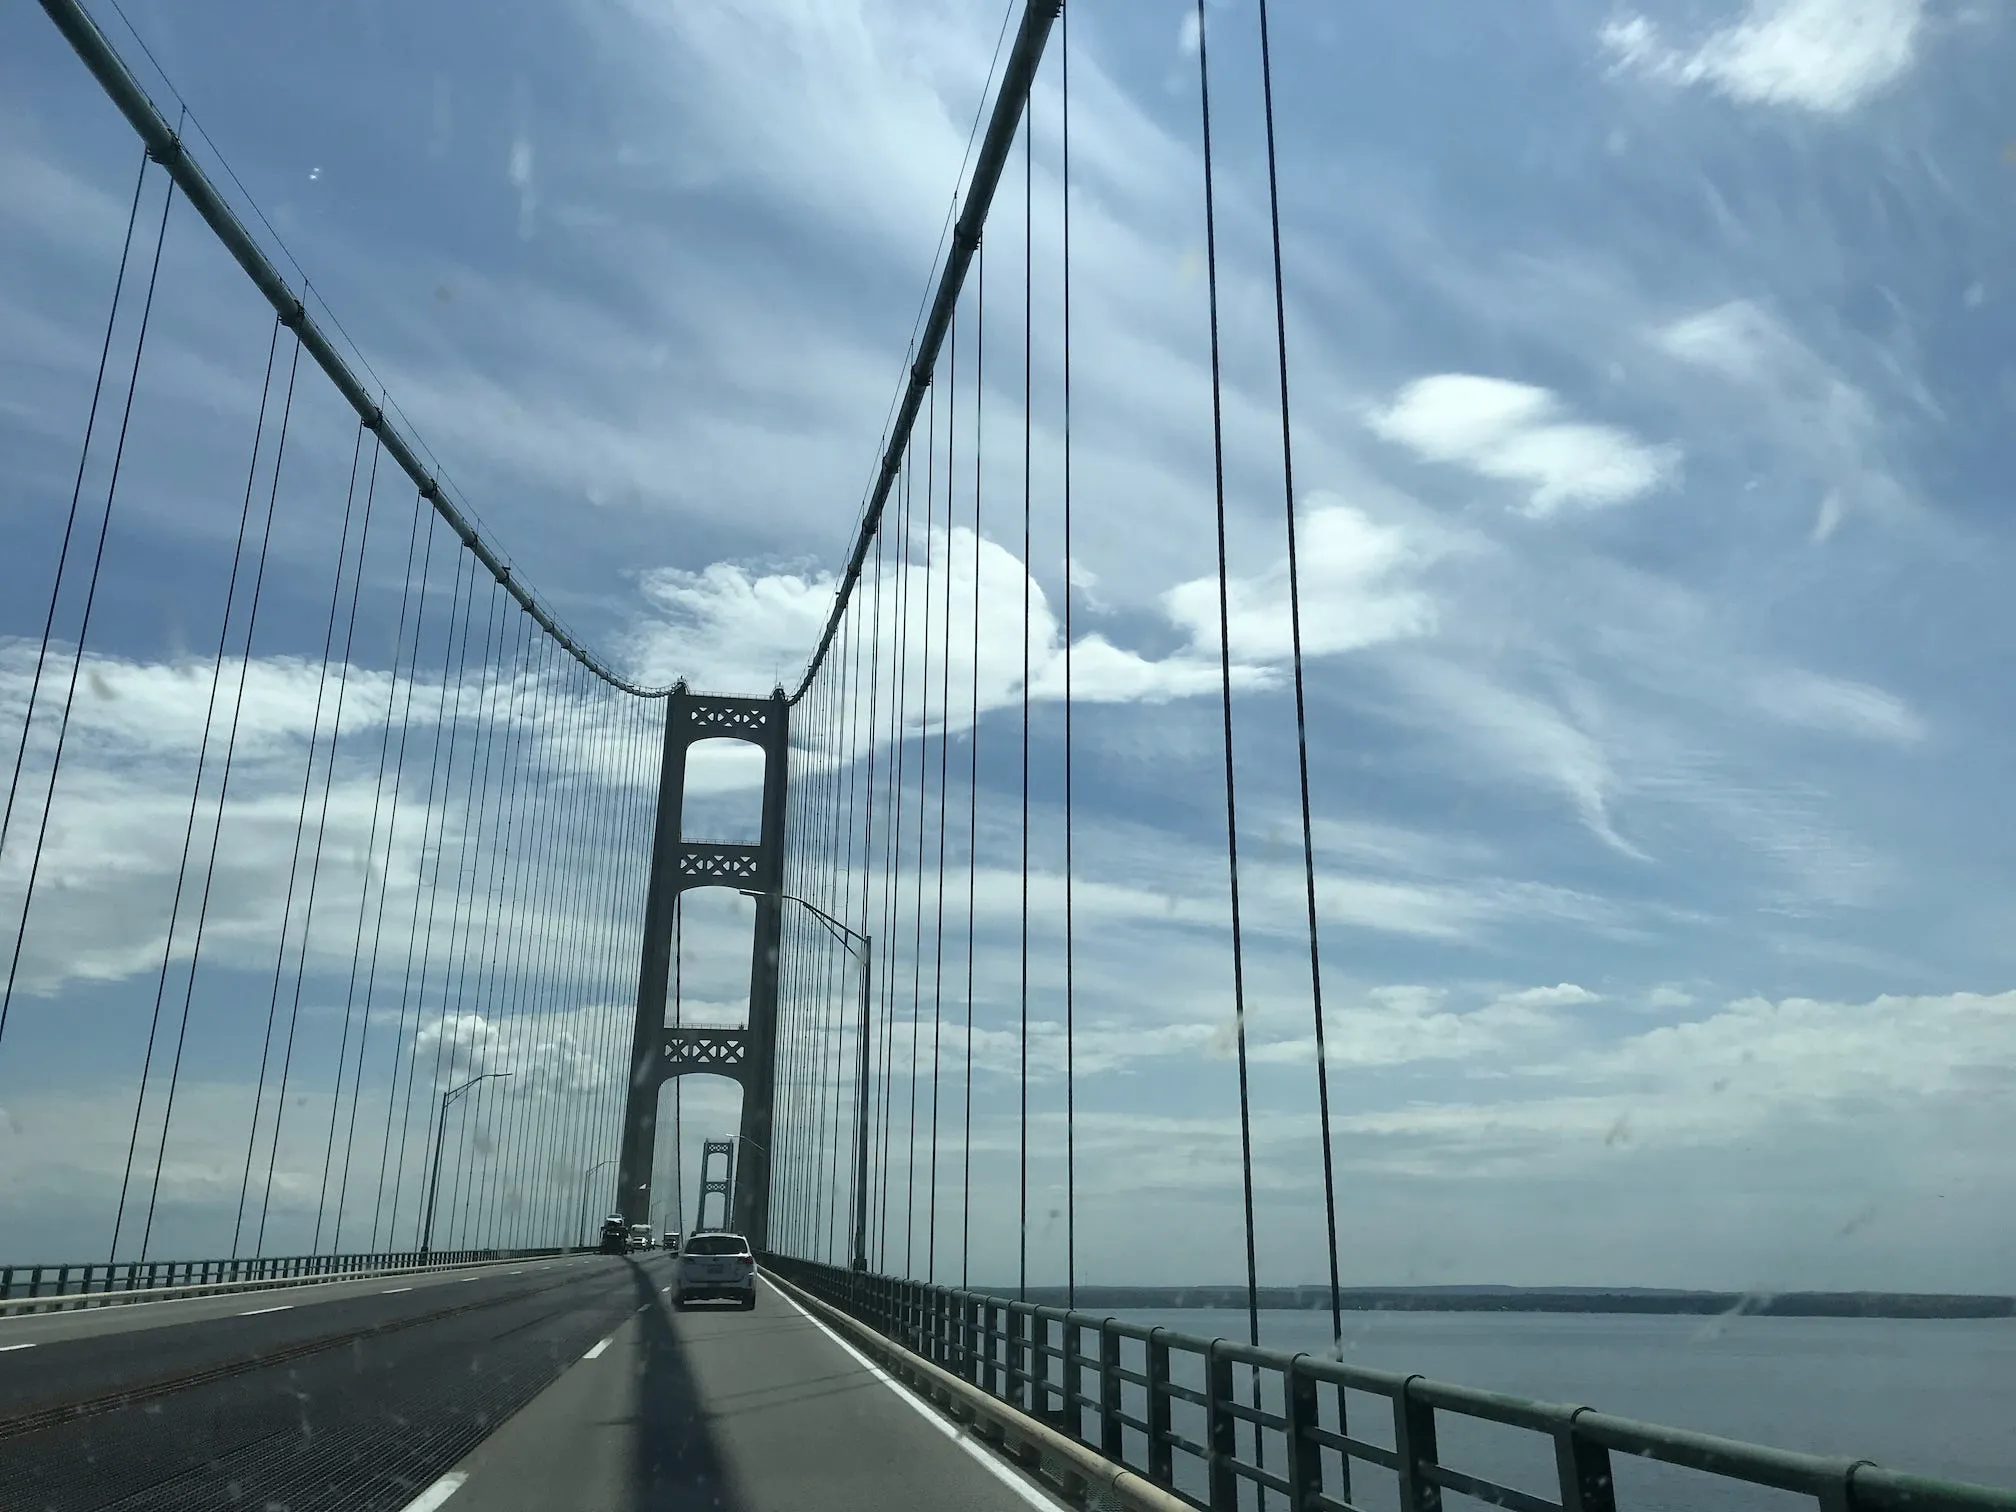 Photo taken from inside a car going over the Mackinac Bridge